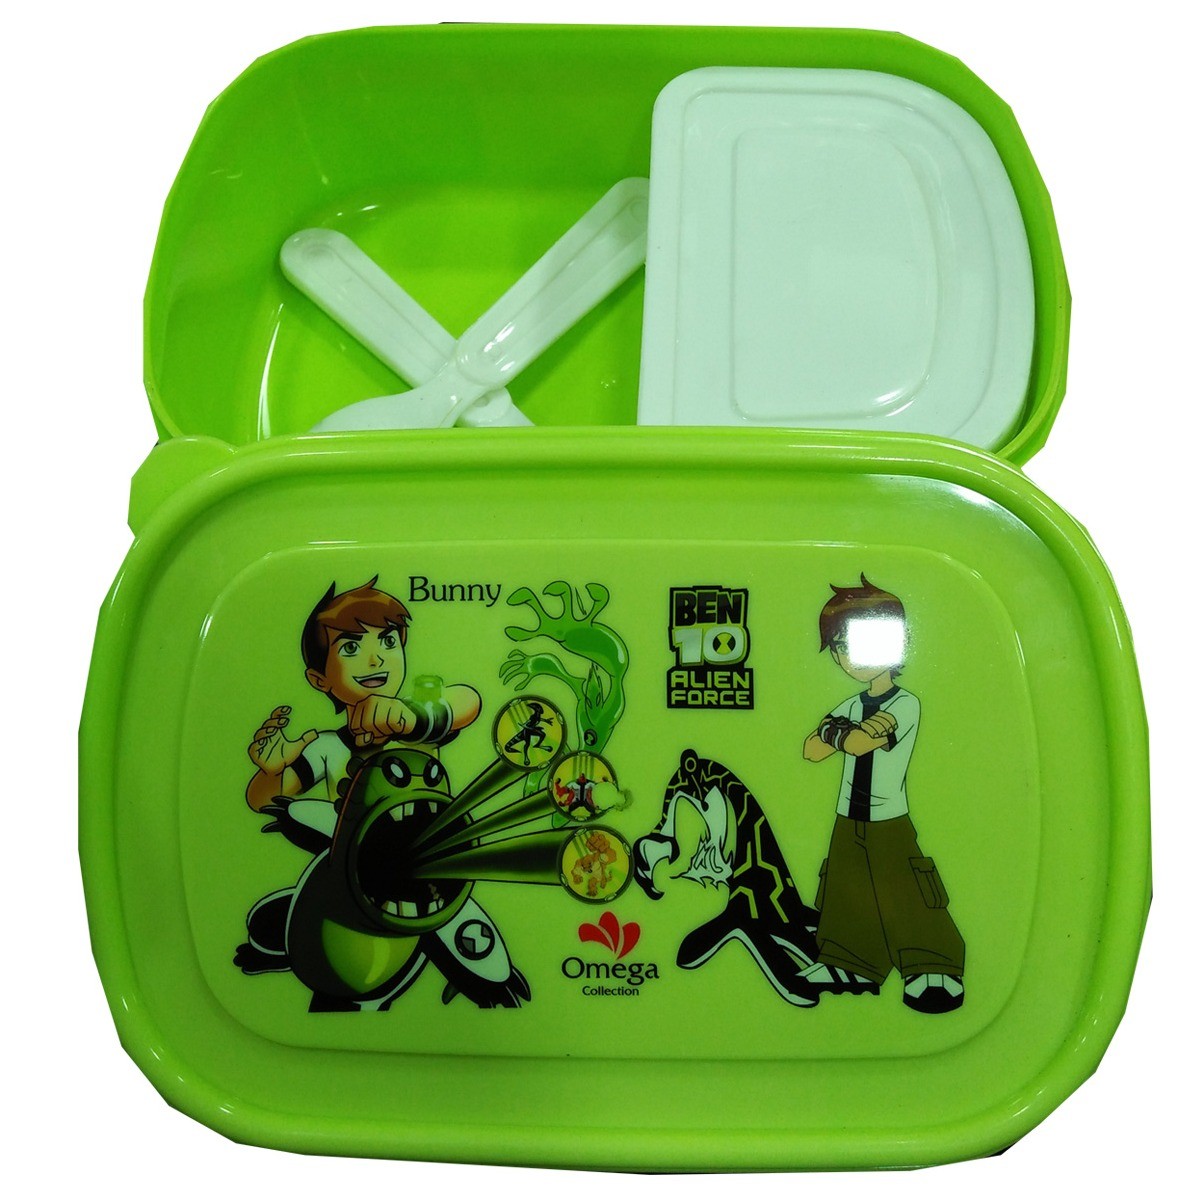 Omega Ben10 Bunny Themed Lunch box for Kids - Green